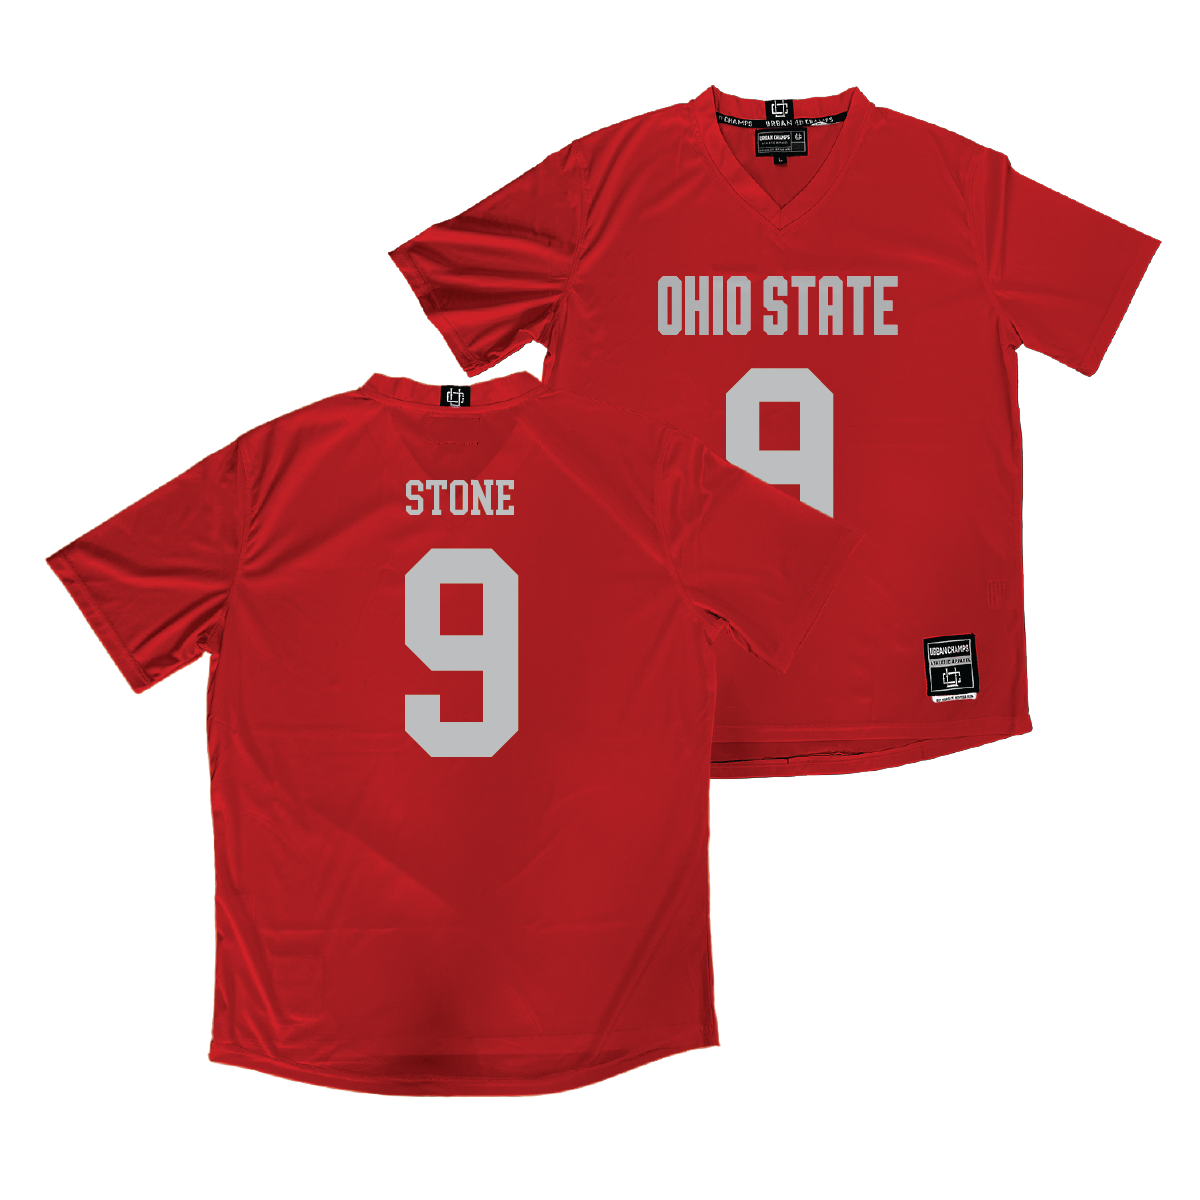 Ohio State Women's Lacrosse Red Jersey - Kampbell Stone | #9